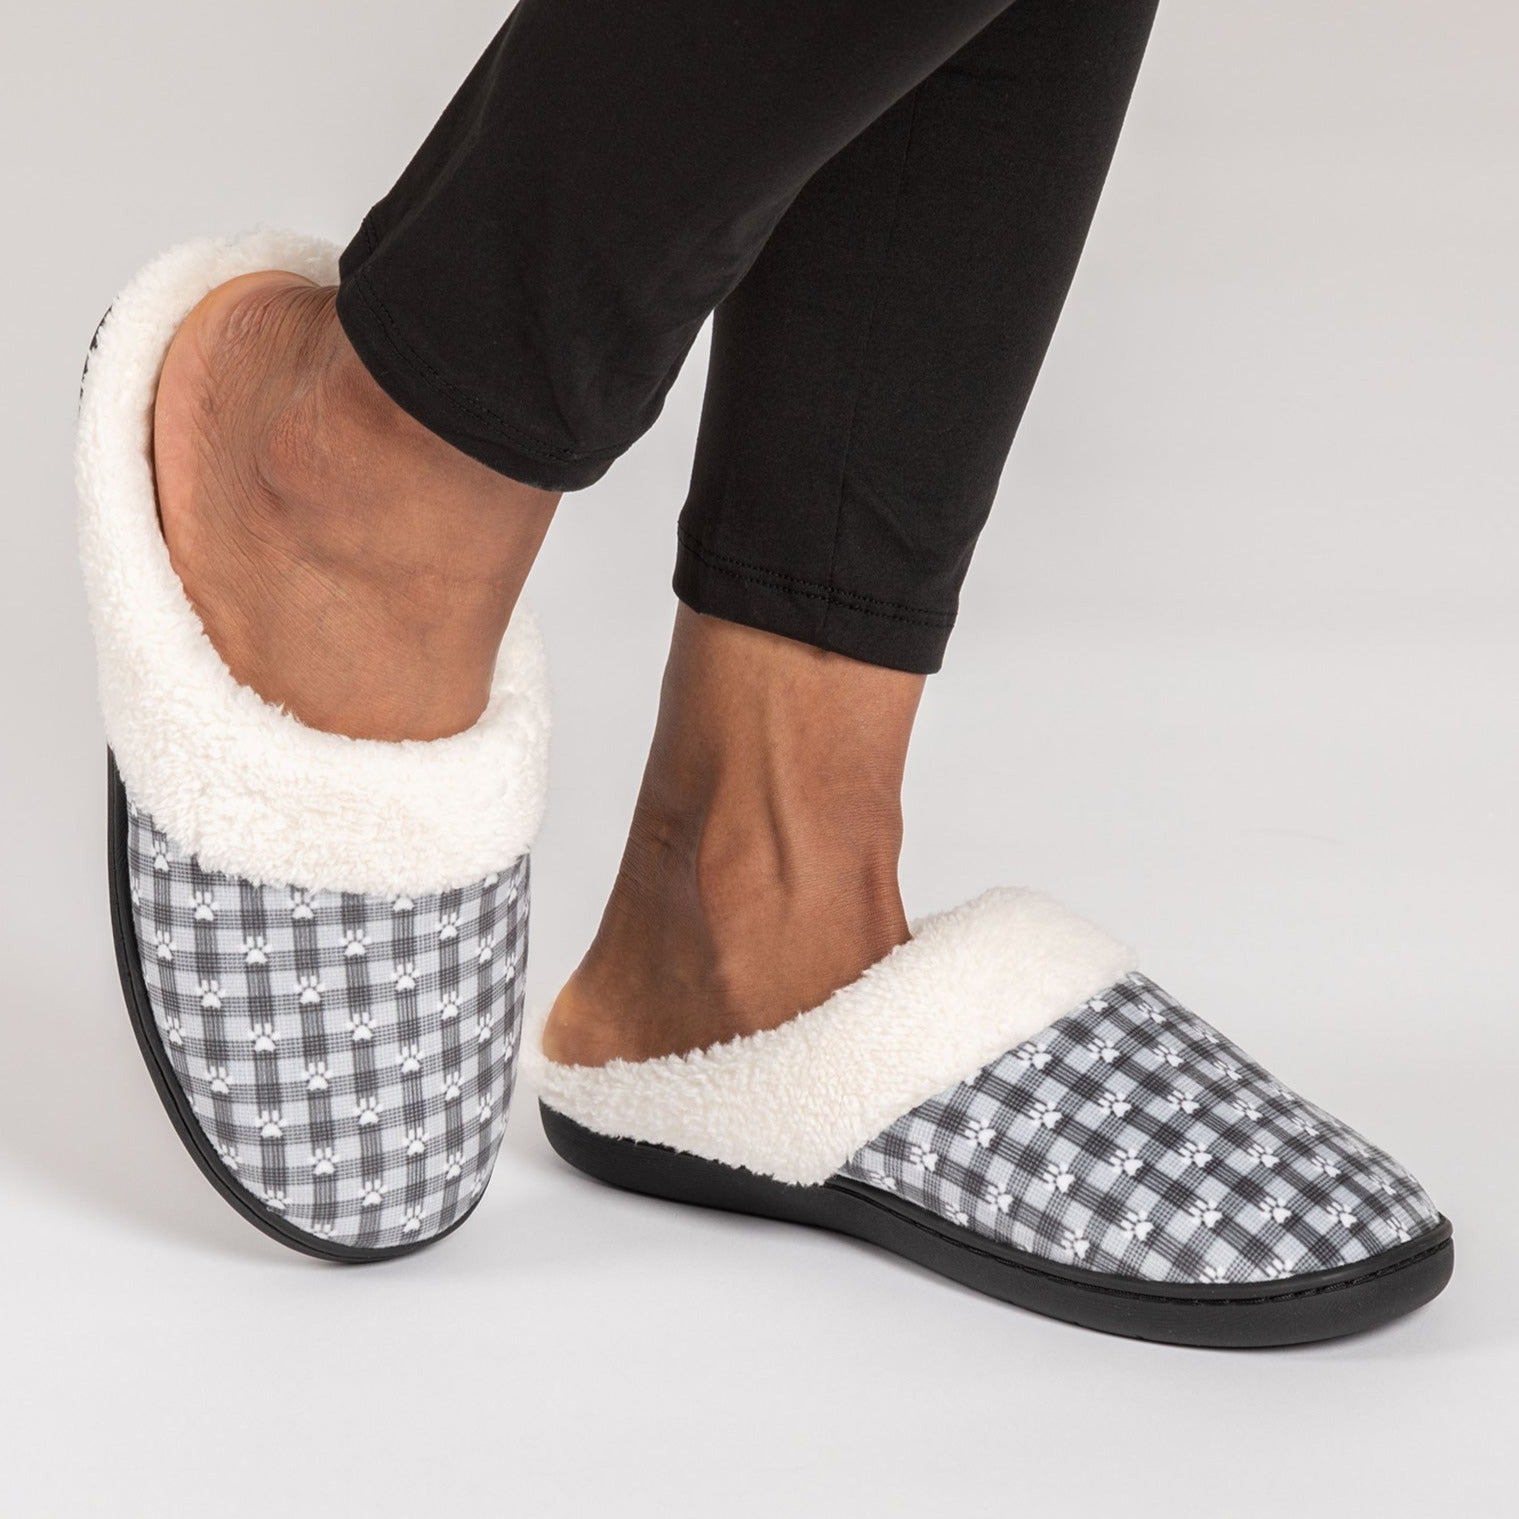 Pawsitively Beautiful Slide Slippers - Basket Weave Paws - S